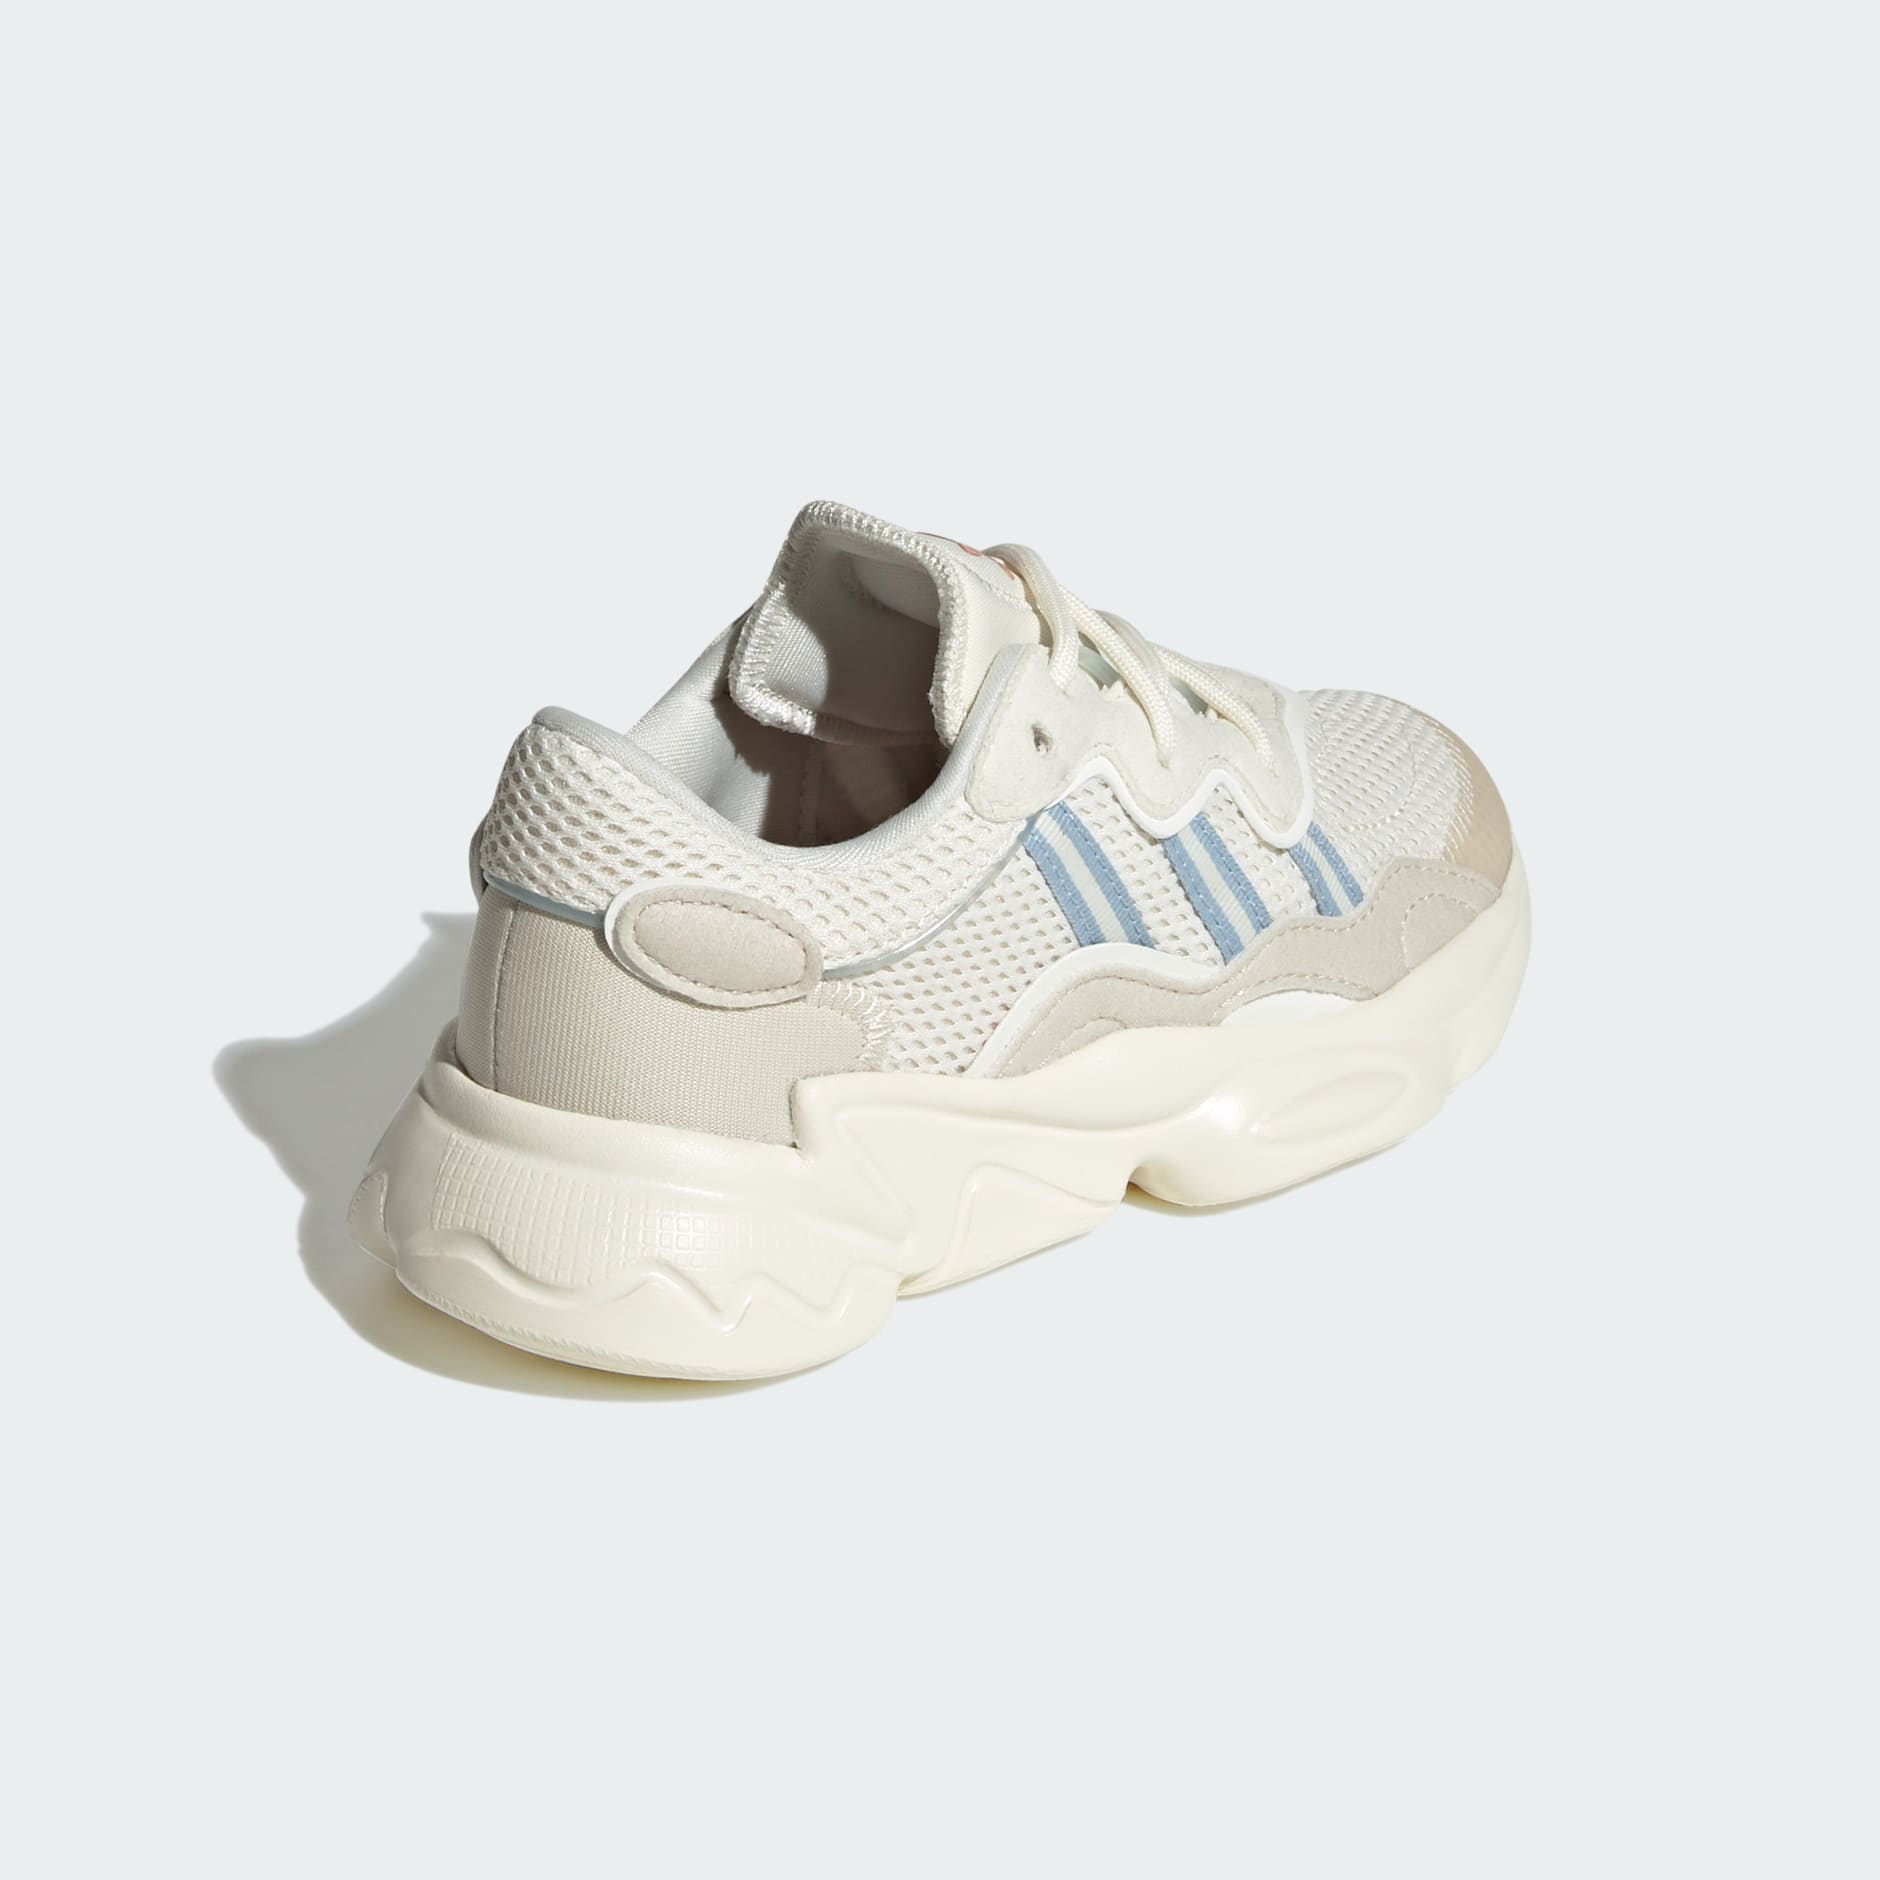 In detail voertuig Dekbed Kids Shoes - OZWEEGO Shoes - White | adidas Oman